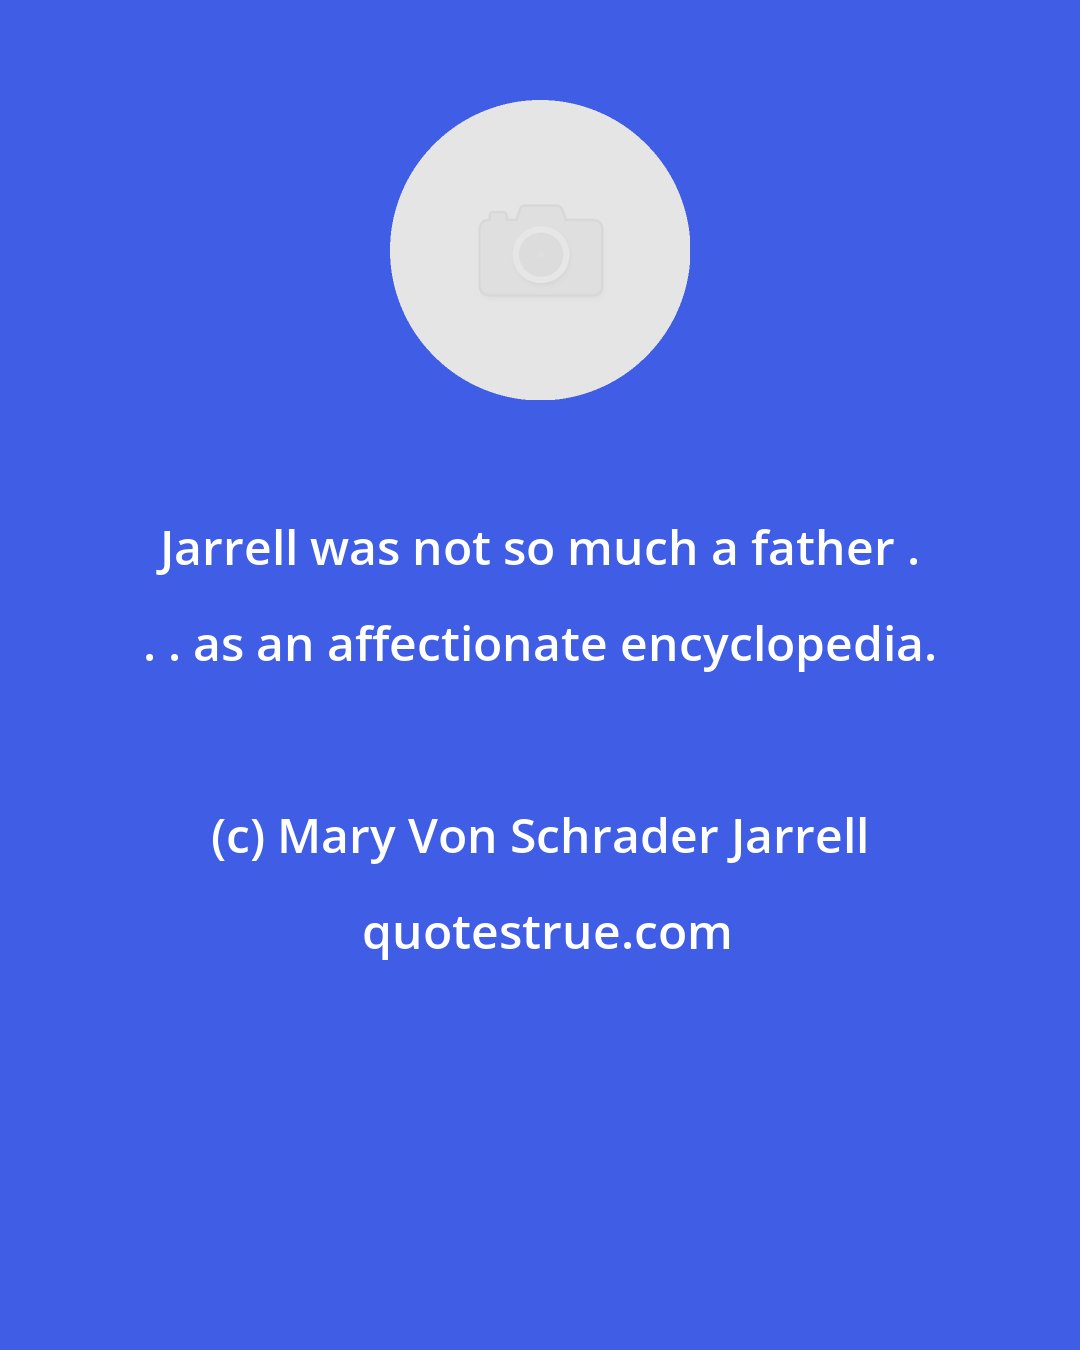 Mary Von Schrader Jarrell: Jarrell was not so much a father . . . as an affectionate encyclopedia.